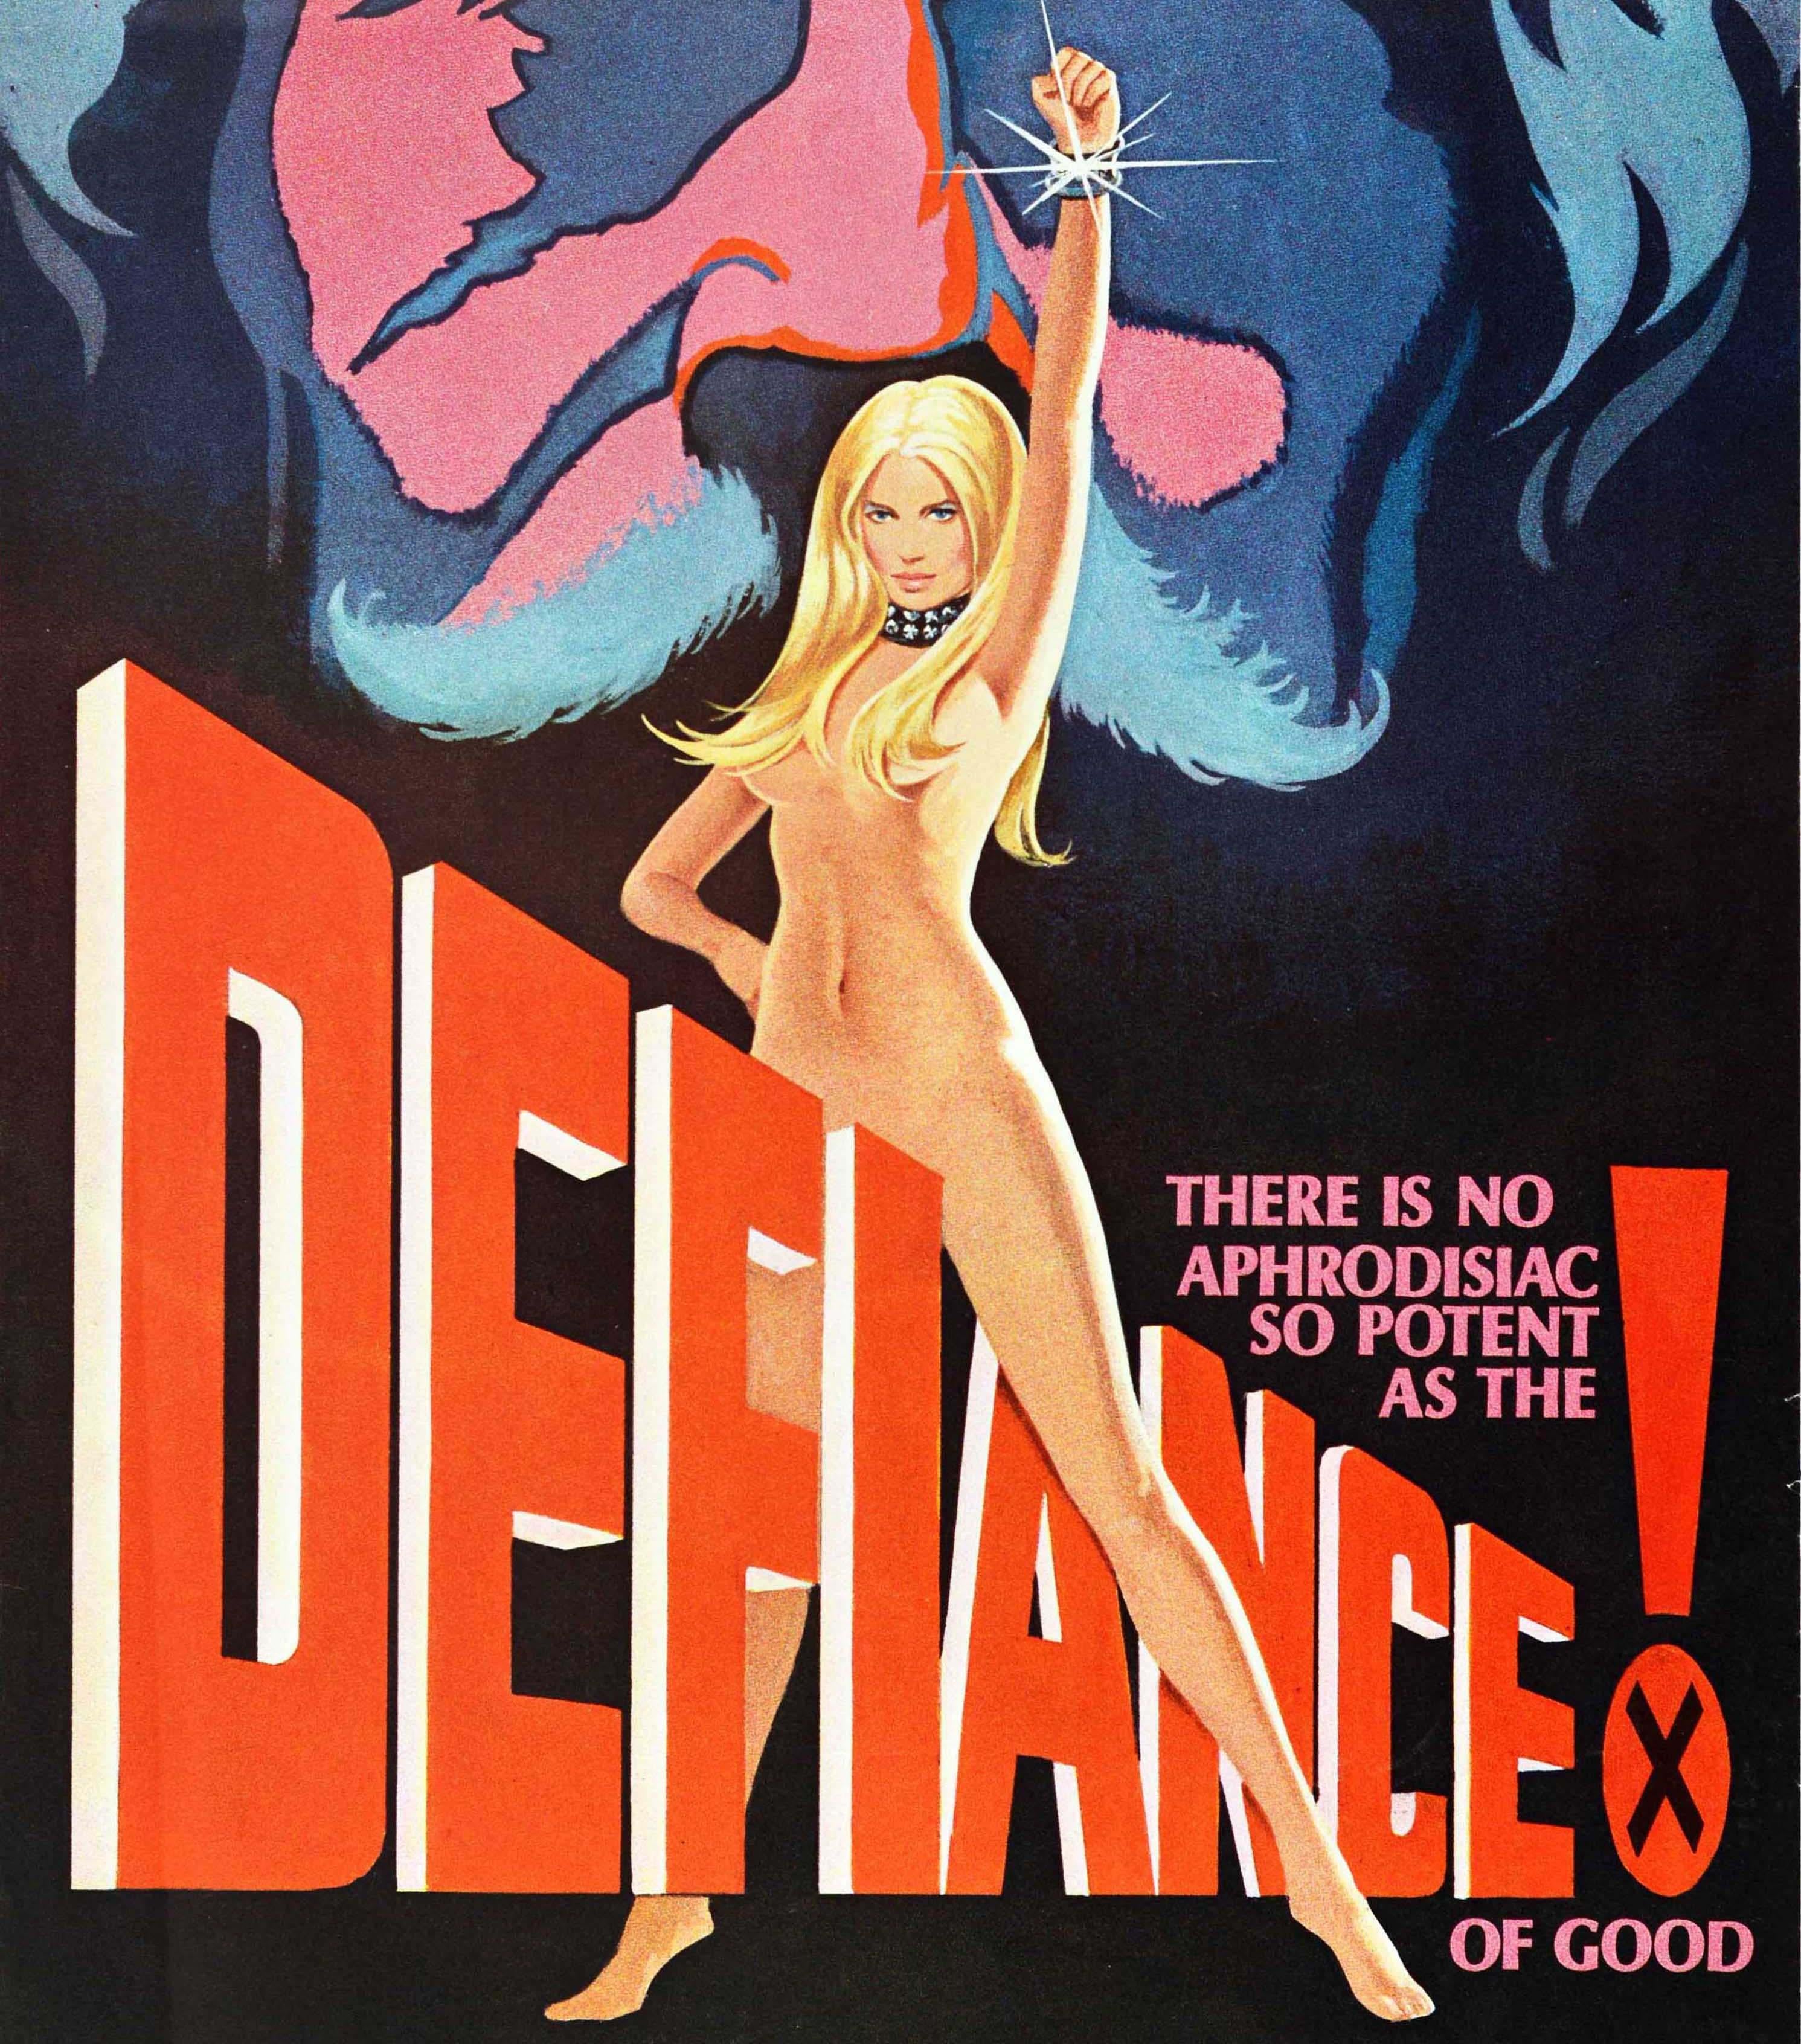 Original vintage cinema poster for an X rated adults only crime horror film - The Defiance of Good - directed by Armand Weston and starring Jean Jennings and Fred J. Lincoln featuring a naked lady with blonde hair standing with one arm raised over